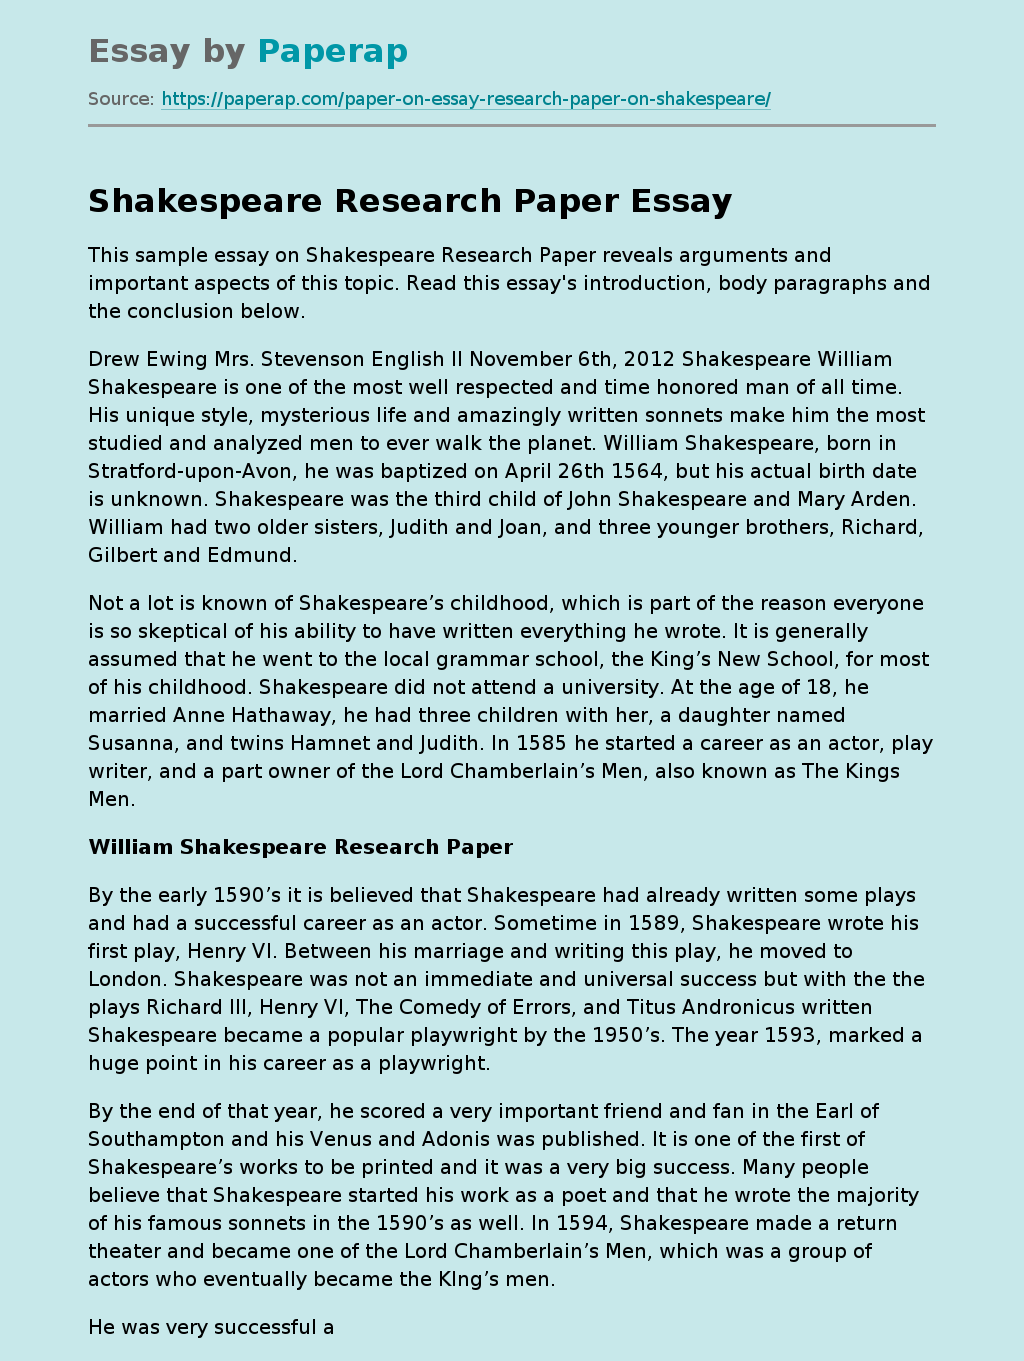 Shakespeare Research Paper